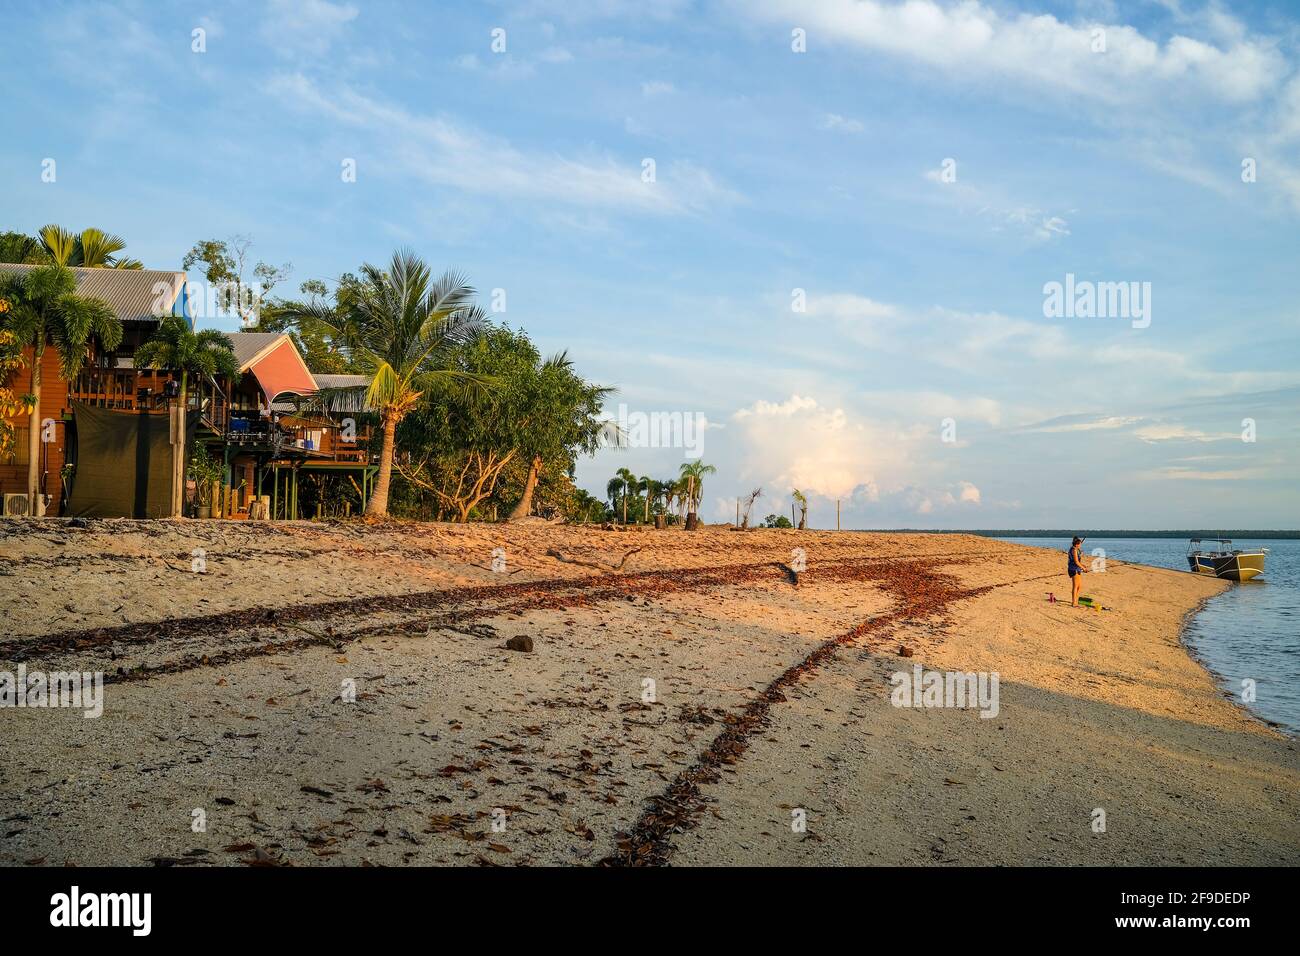 Crab Claw Island Resort in the Northern Territory of Australia Stock Photo